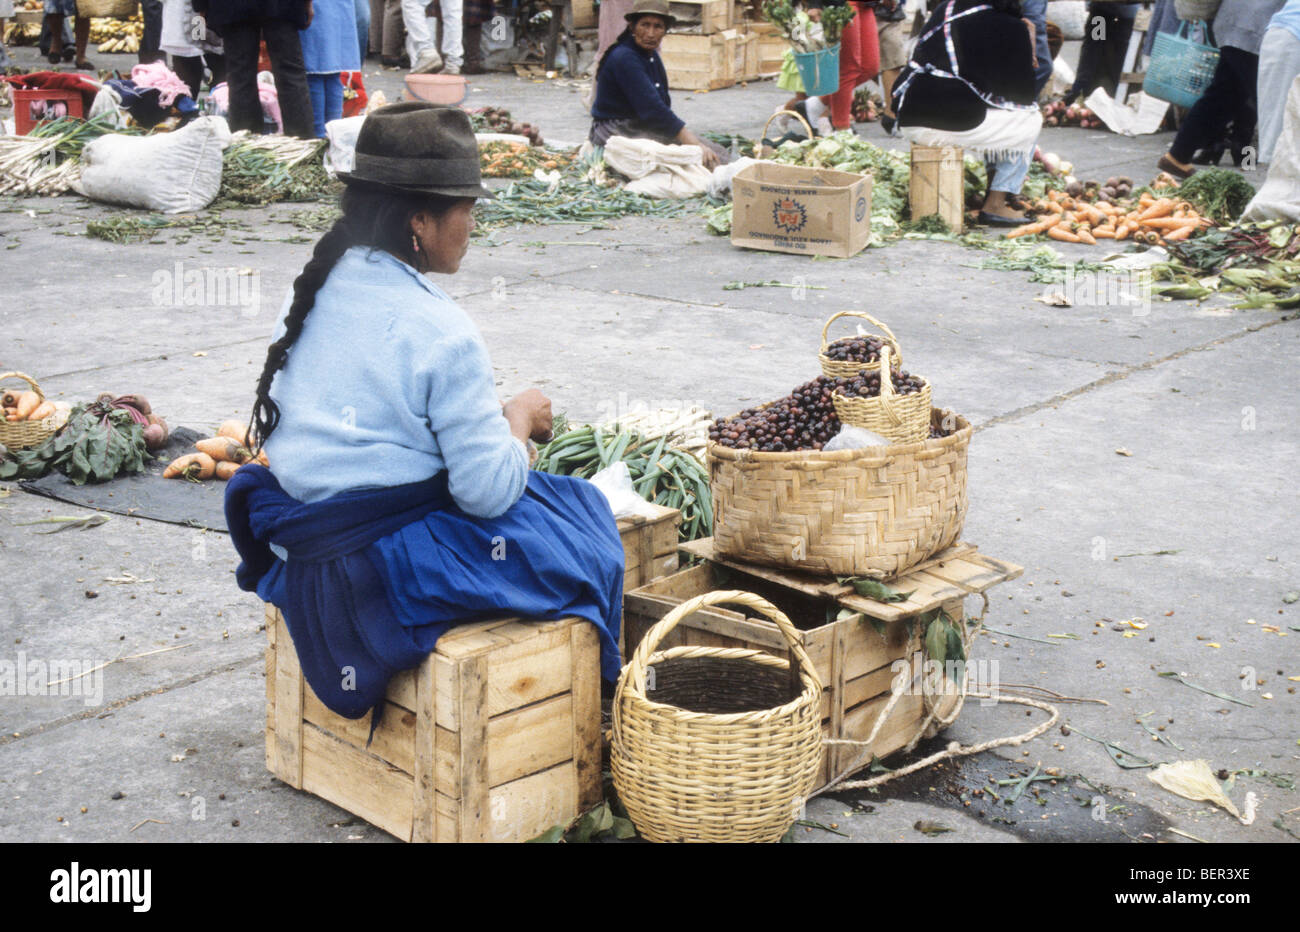 Woman in traditional inca dress selling dark berries from large wicker basket.  Local market upland ecuador. Stock Photo